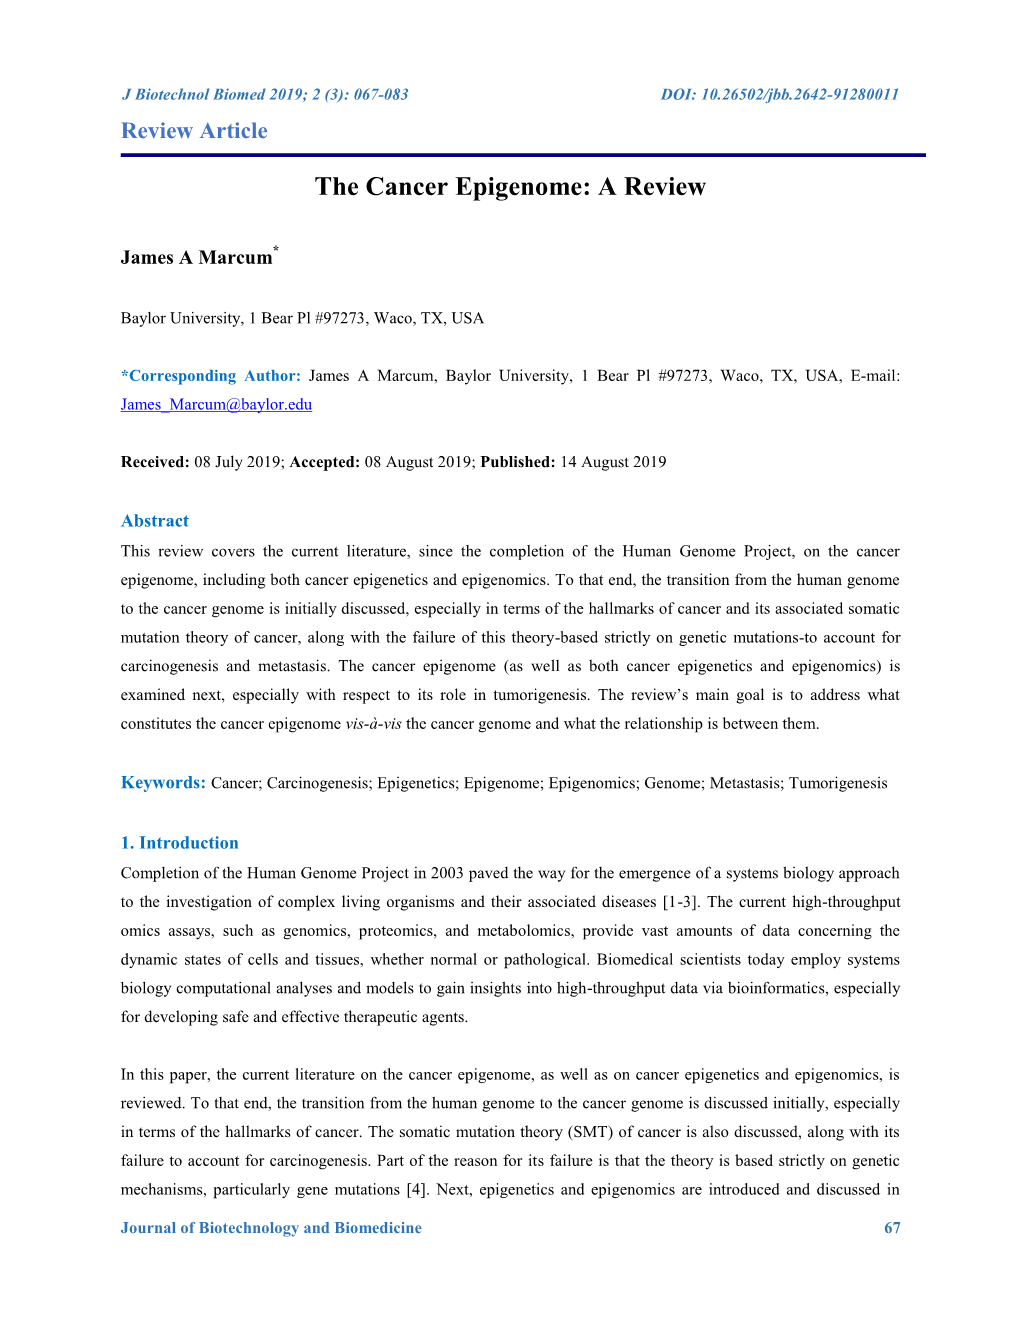 The Cancer Epigenome: a Review